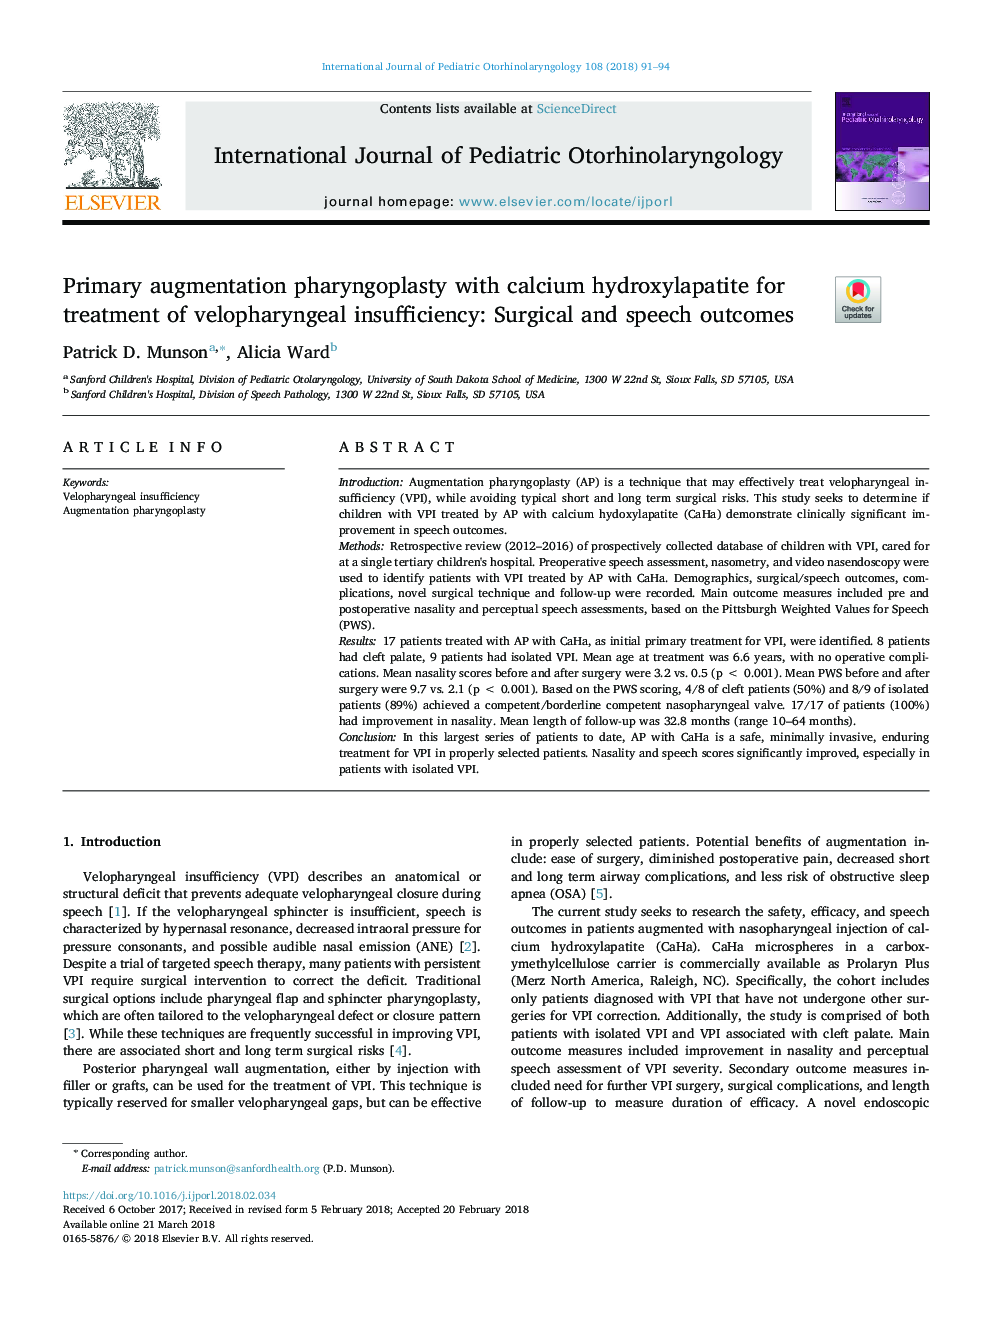 Primary augmentation pharyngoplasty with calcium hydroxylapatite for treatment of velopharyngeal insufficiency: Surgical and speech outcomes